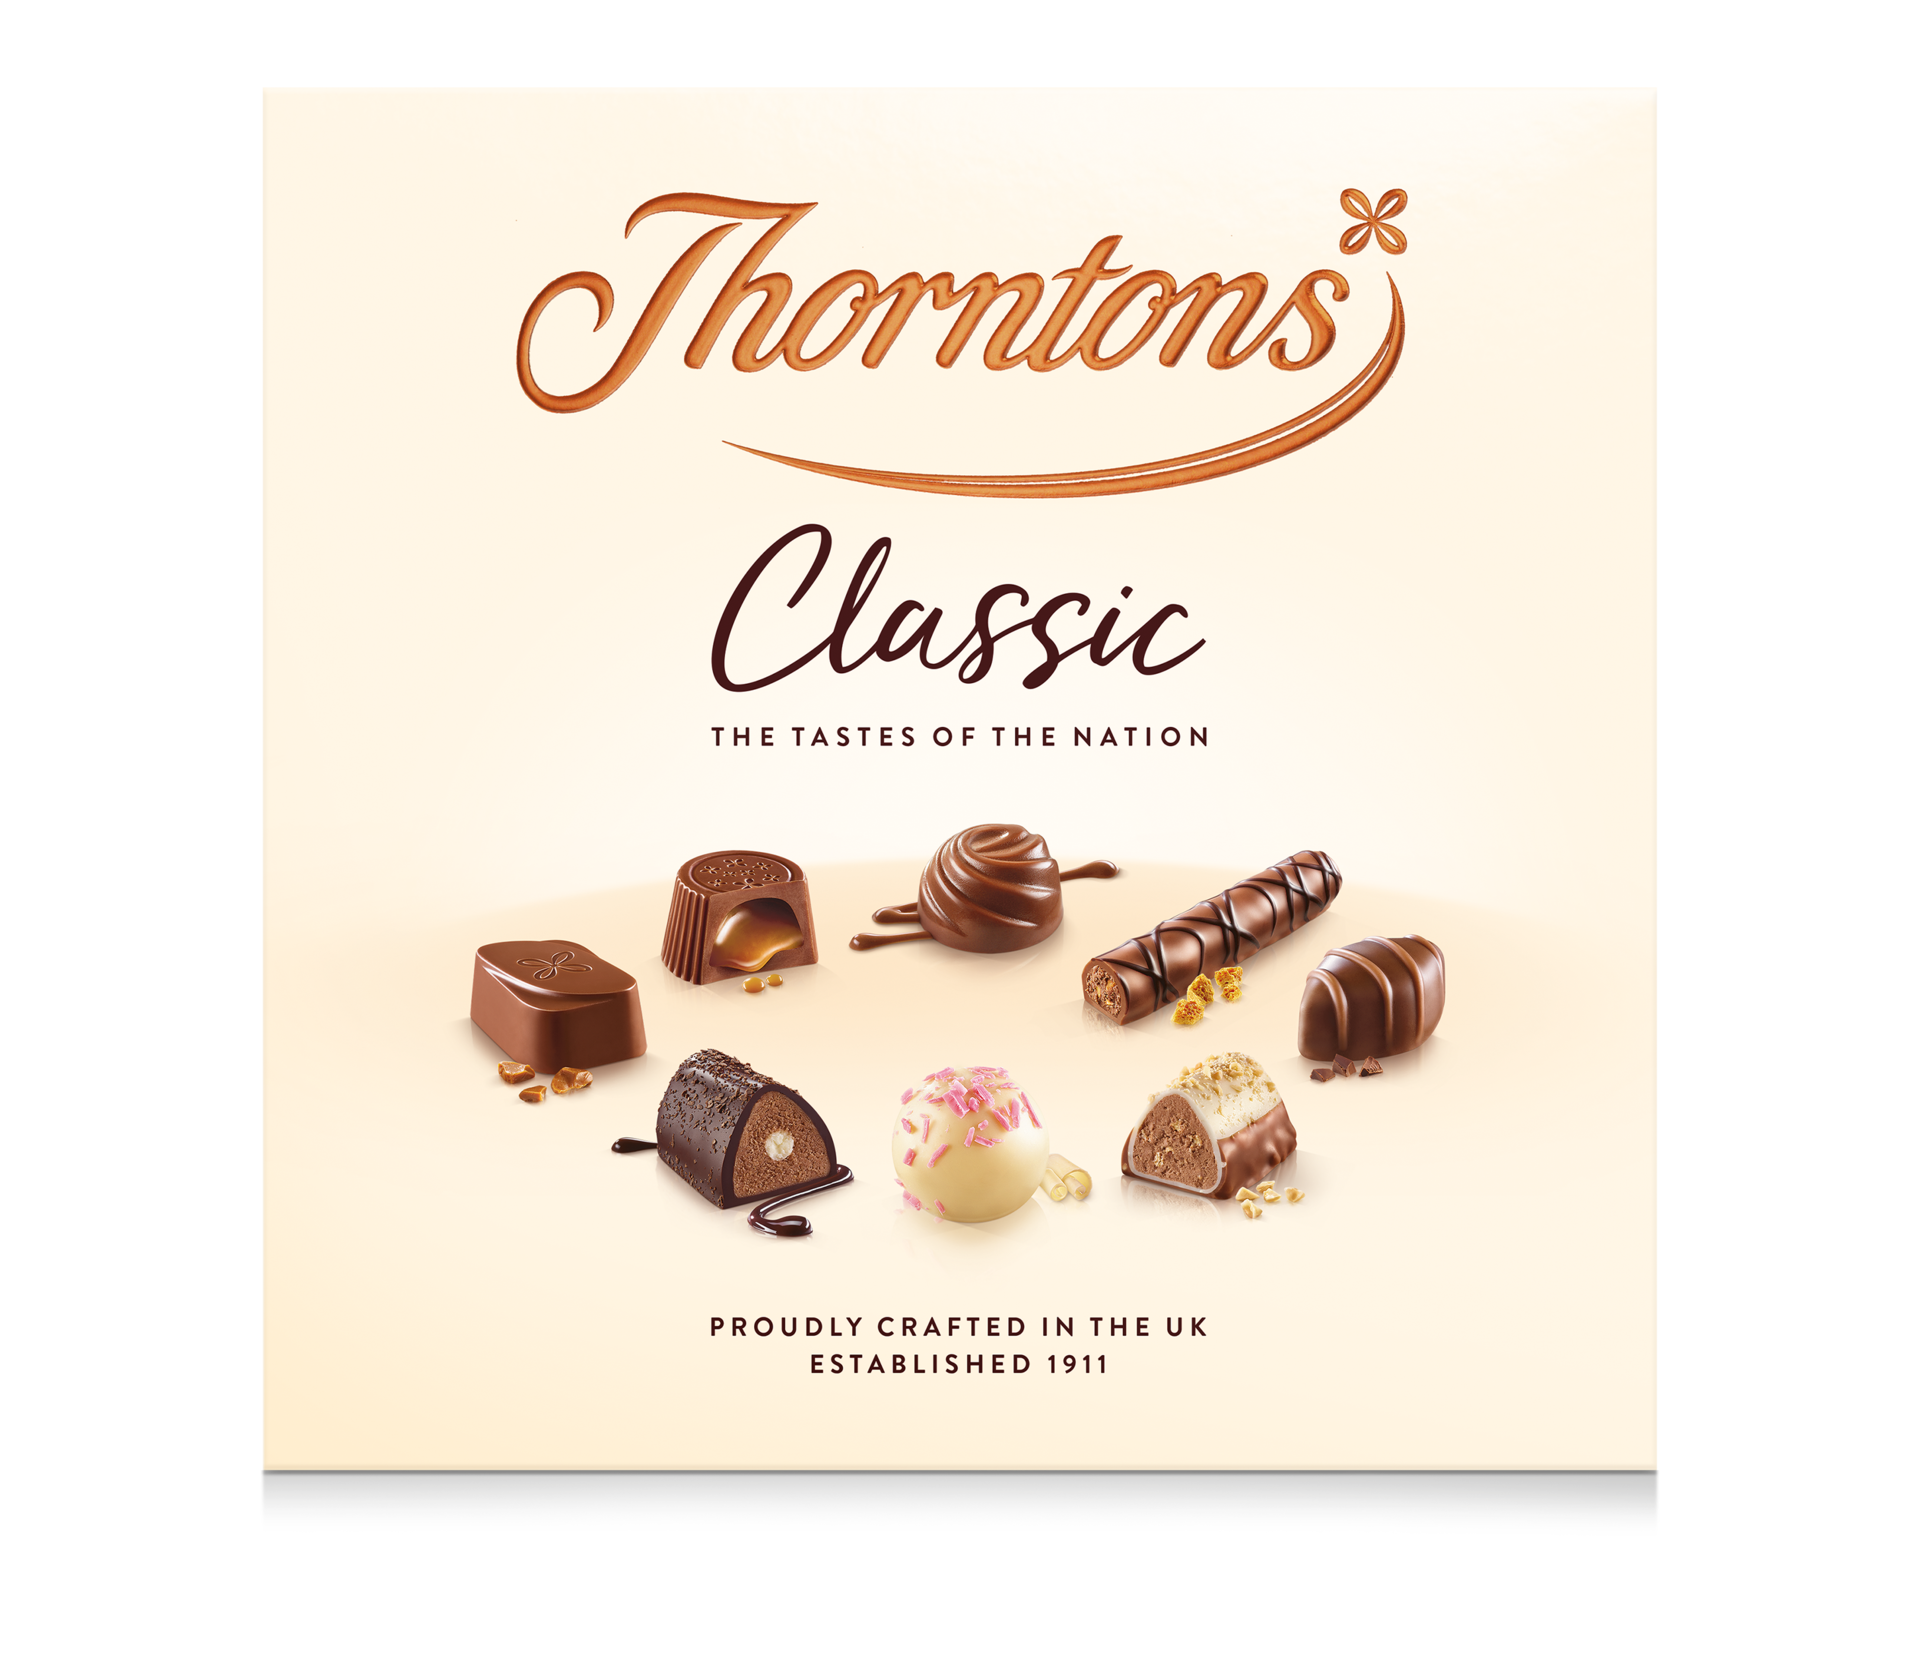 https://www.thorntons.com/medias/sys_master/images/hbd/h77/8916764164126/77204203_main/77204203-main.png?resize=ProductGridComponent